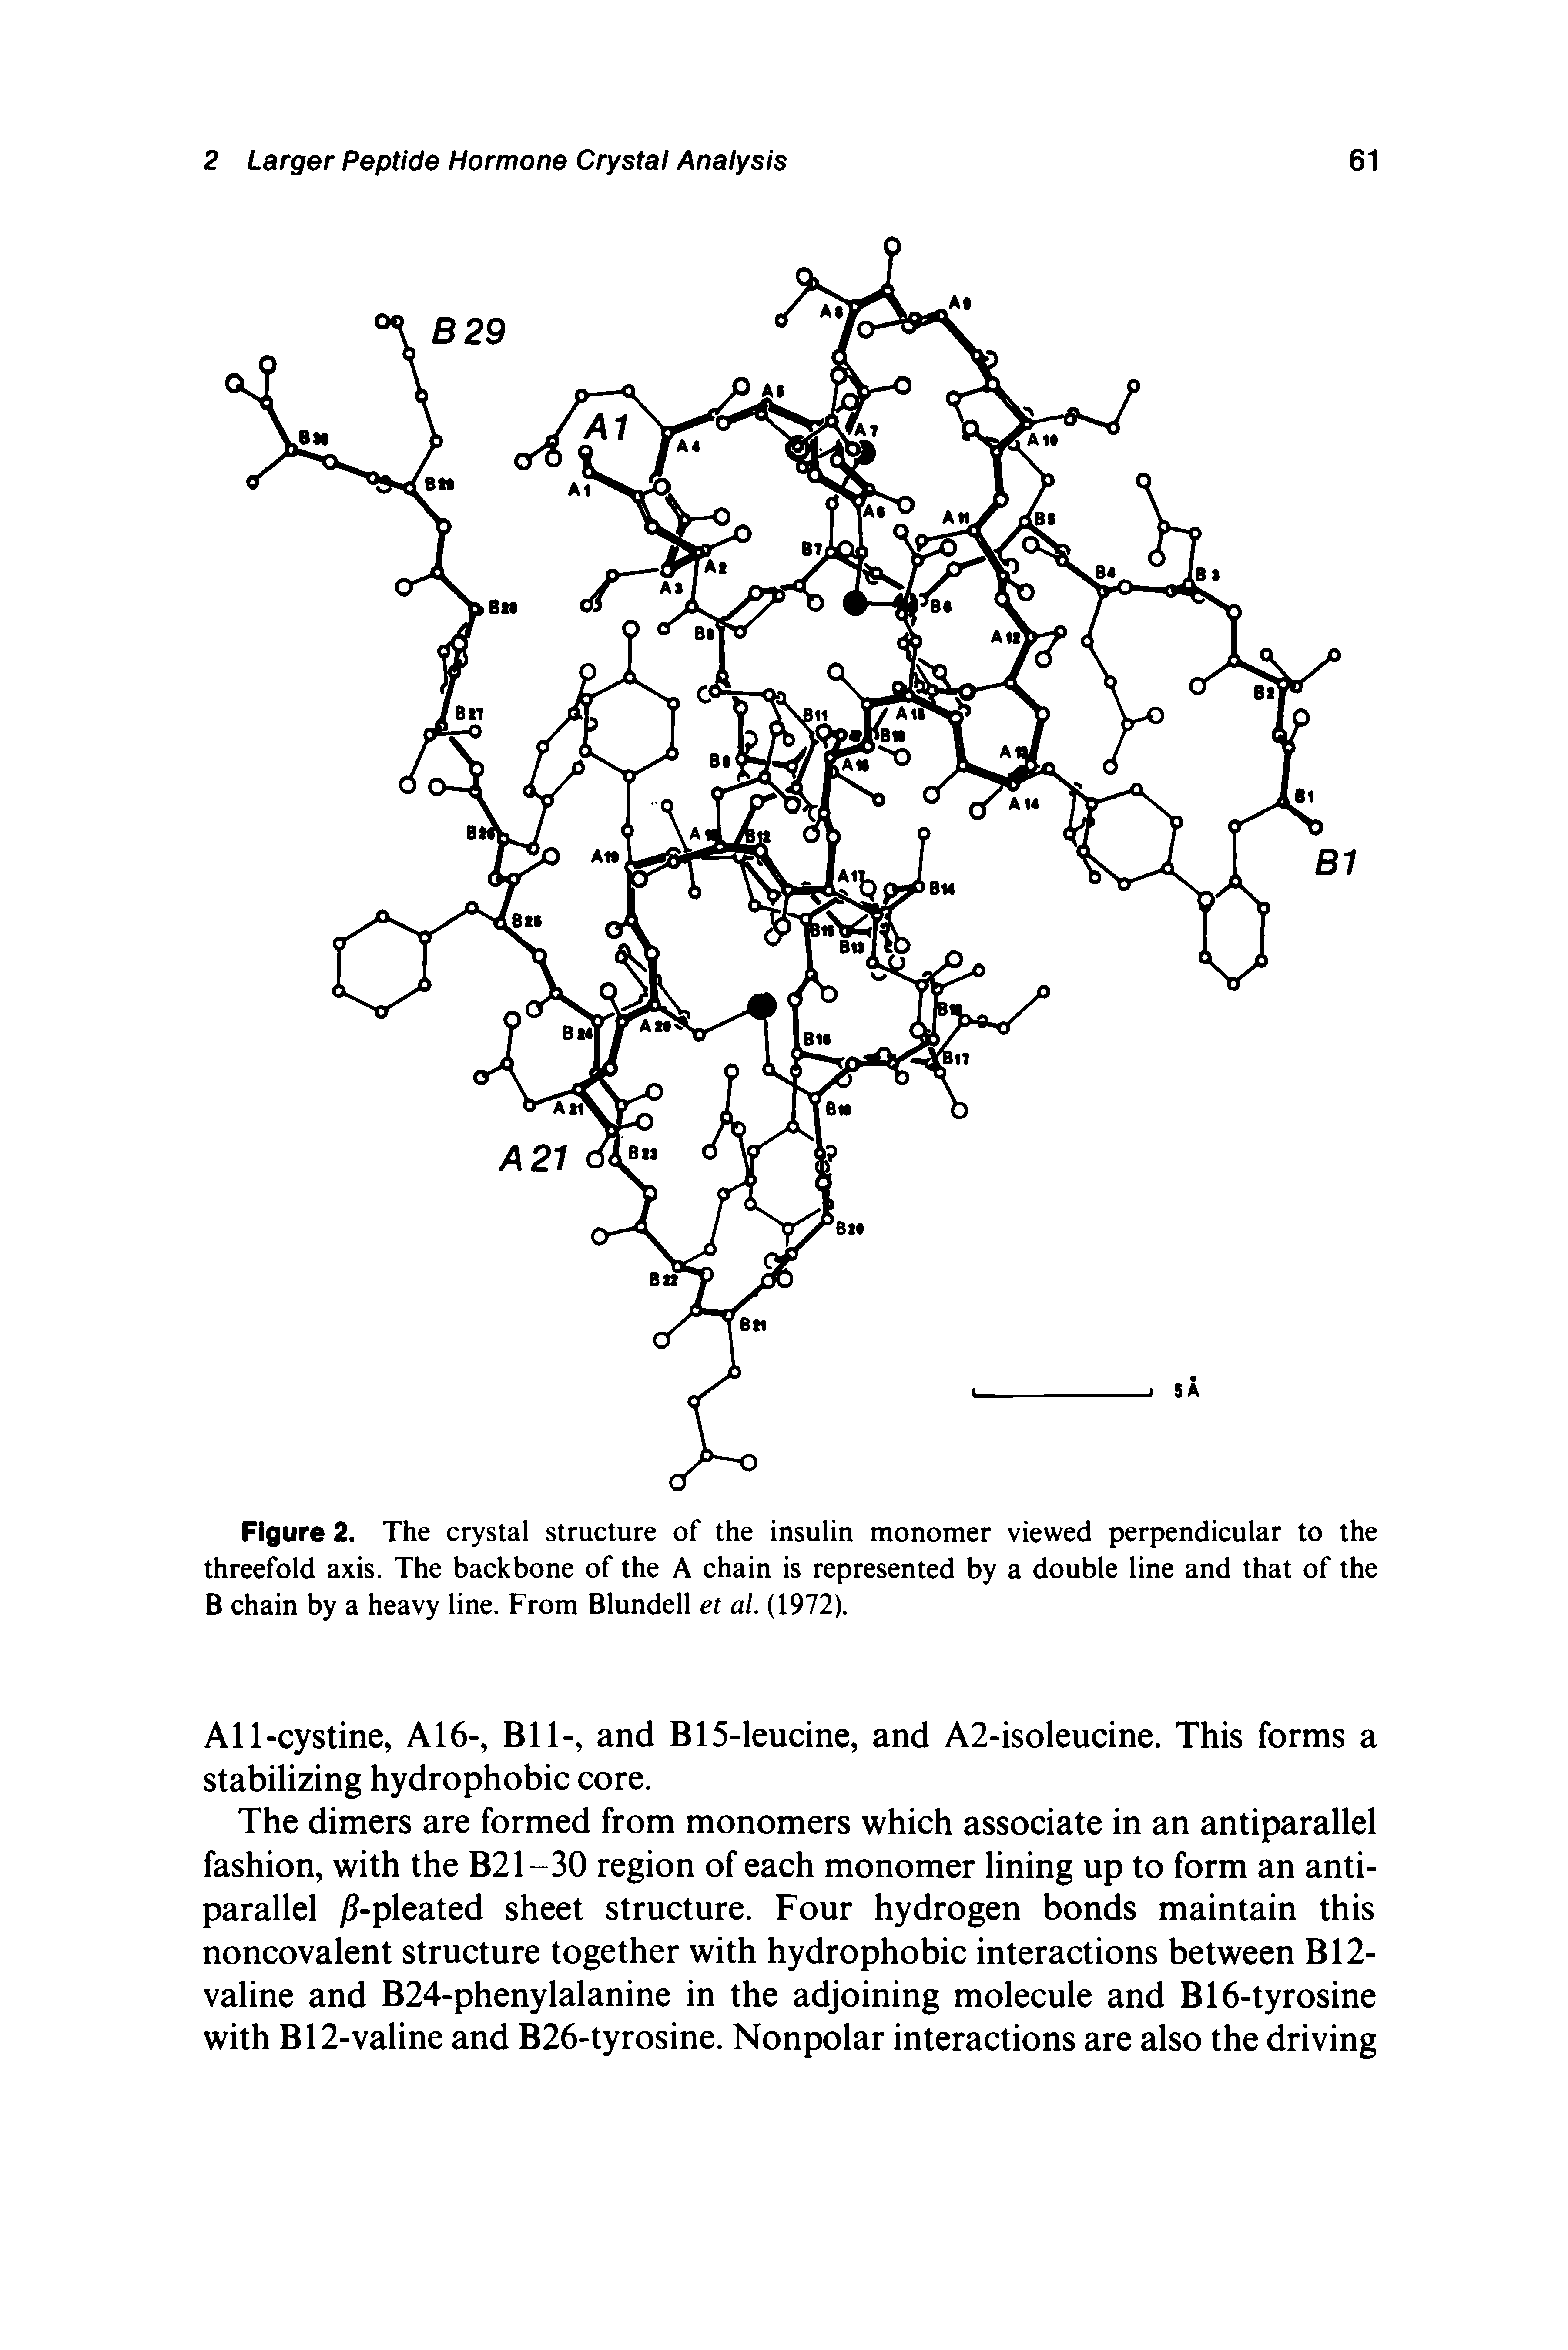 Figure 2. The crystal structure of the insulin monomer viewed perpendicular to the threefold axis. The backbone of the A chain is represented by a double line and that of the B chain by a heavy line. From Blundell et al (1972).